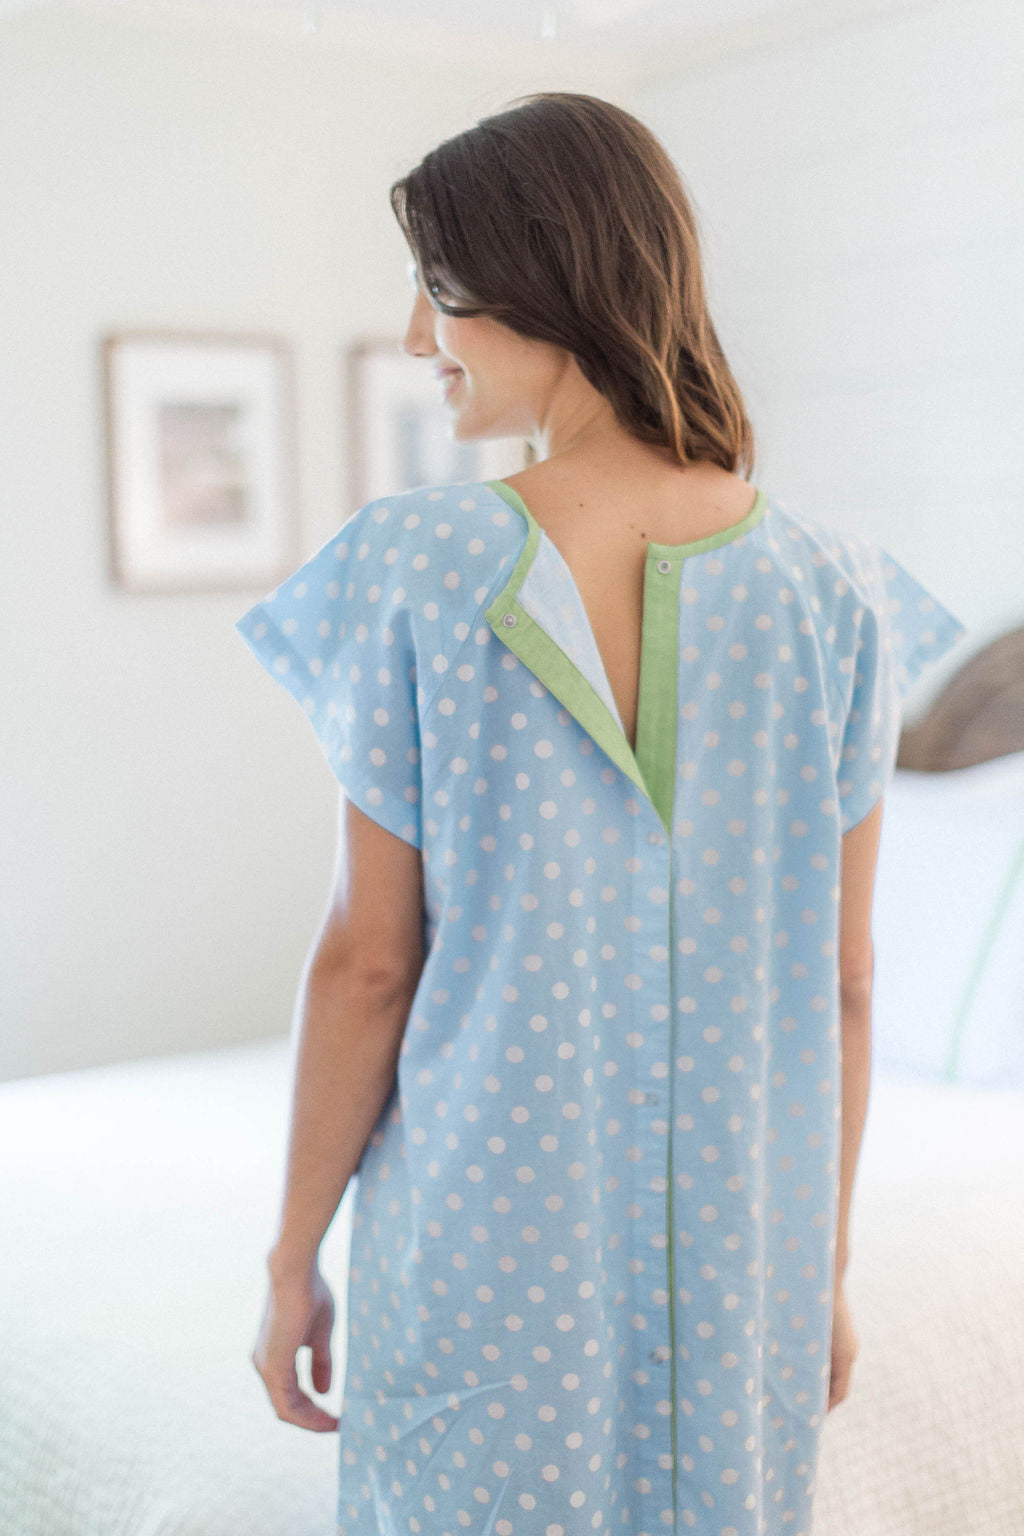 Care+Wear Reversible Hospital Gowns for Women and Men - My CareCrew